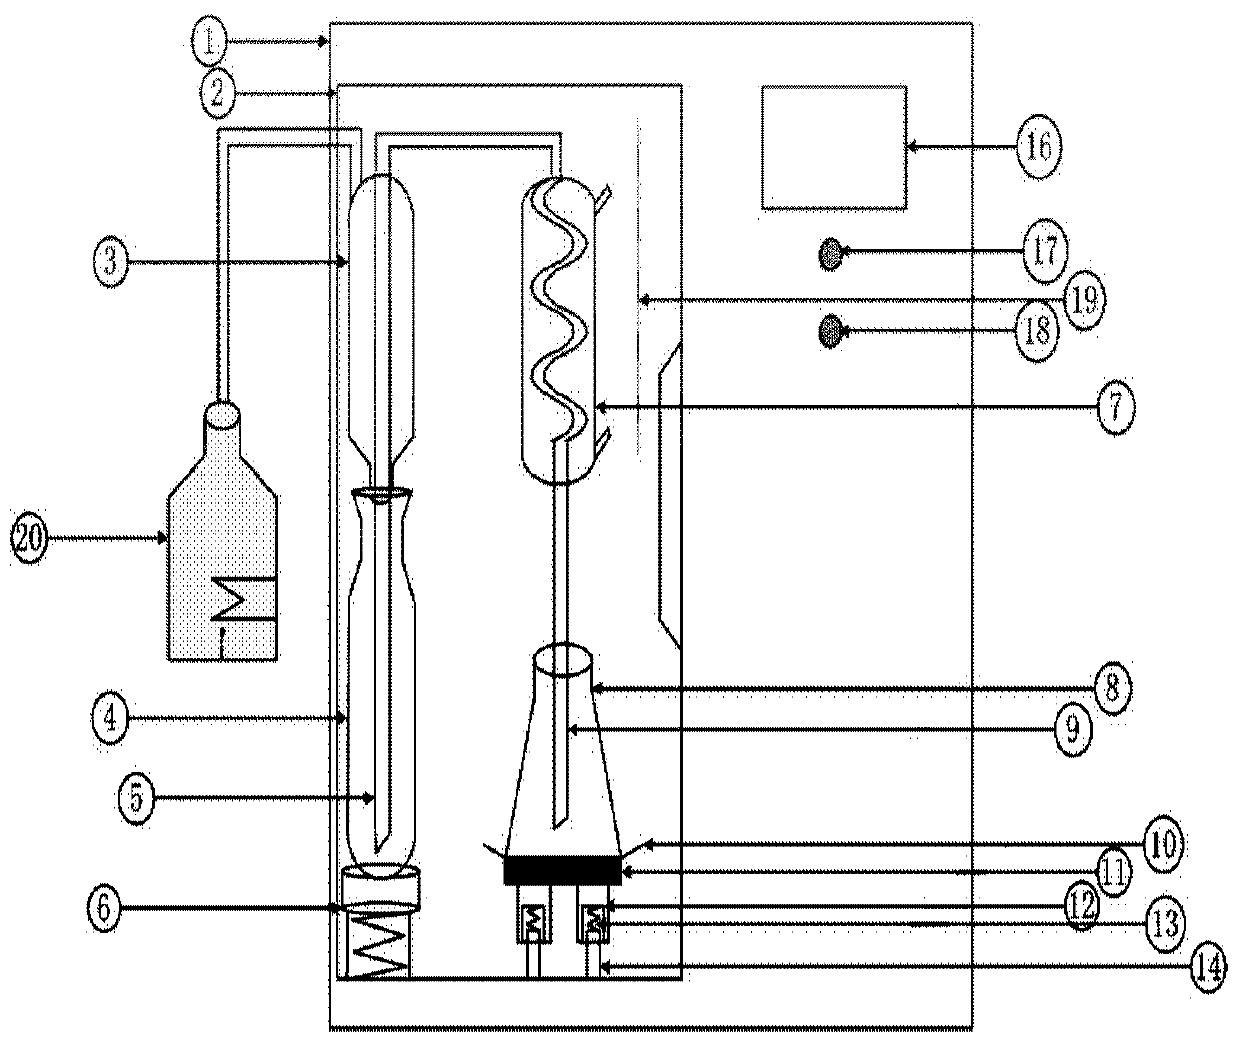 Distillation reflux instrument for detecting volatile matters in food and sample pretreatment method